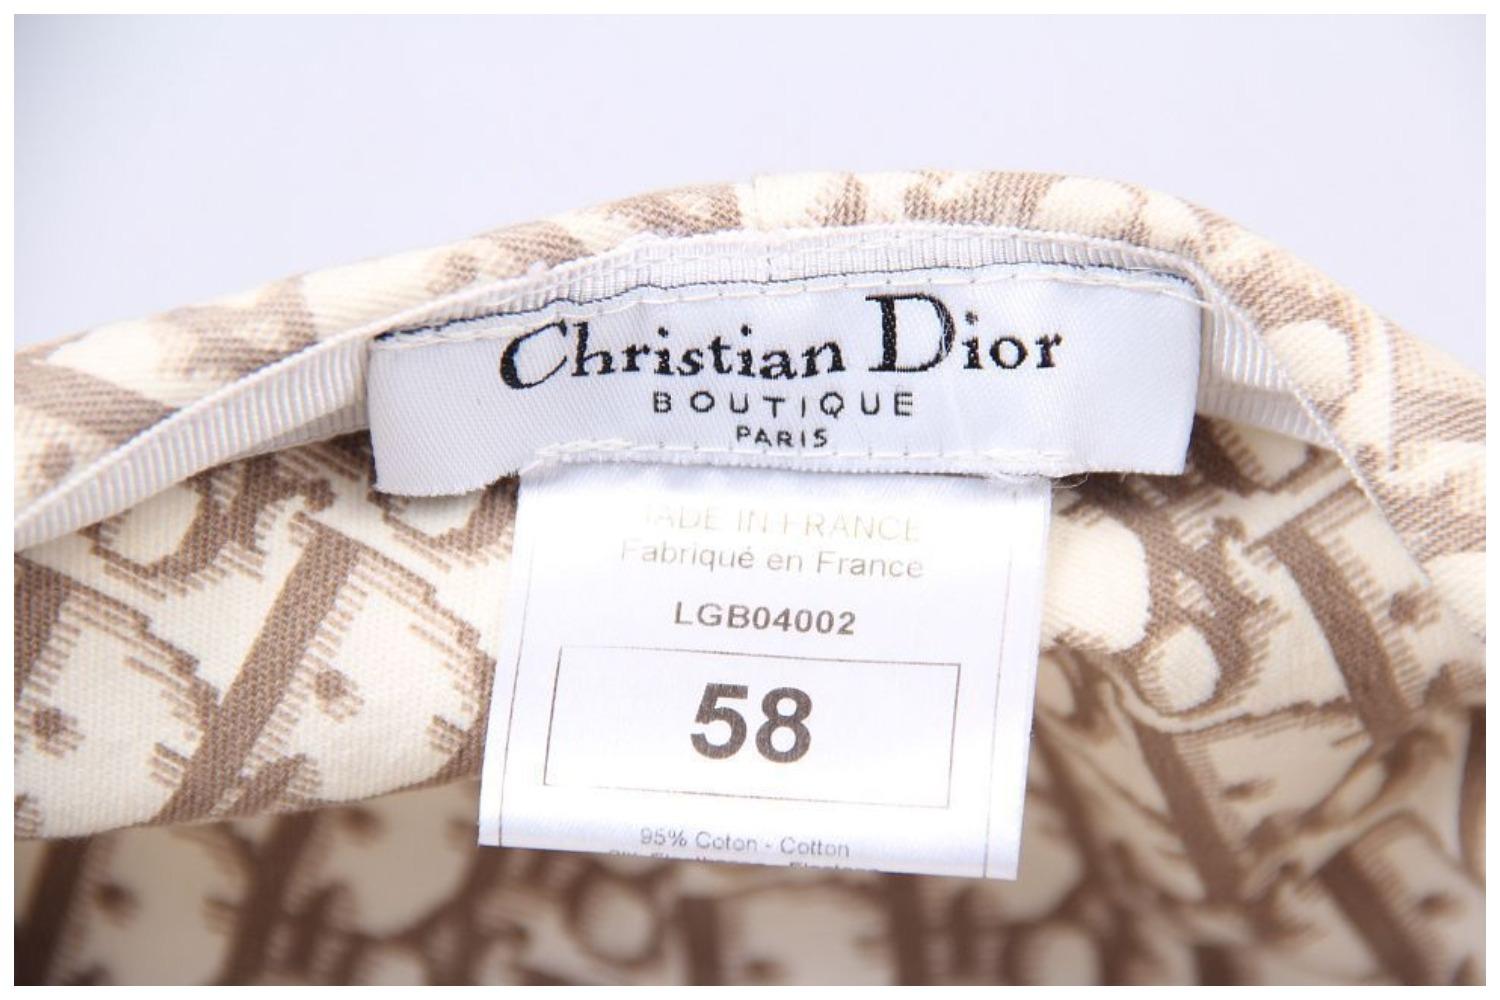 Christian Dior by Galliano flower Trotter cap SZ 58 For Sale 2